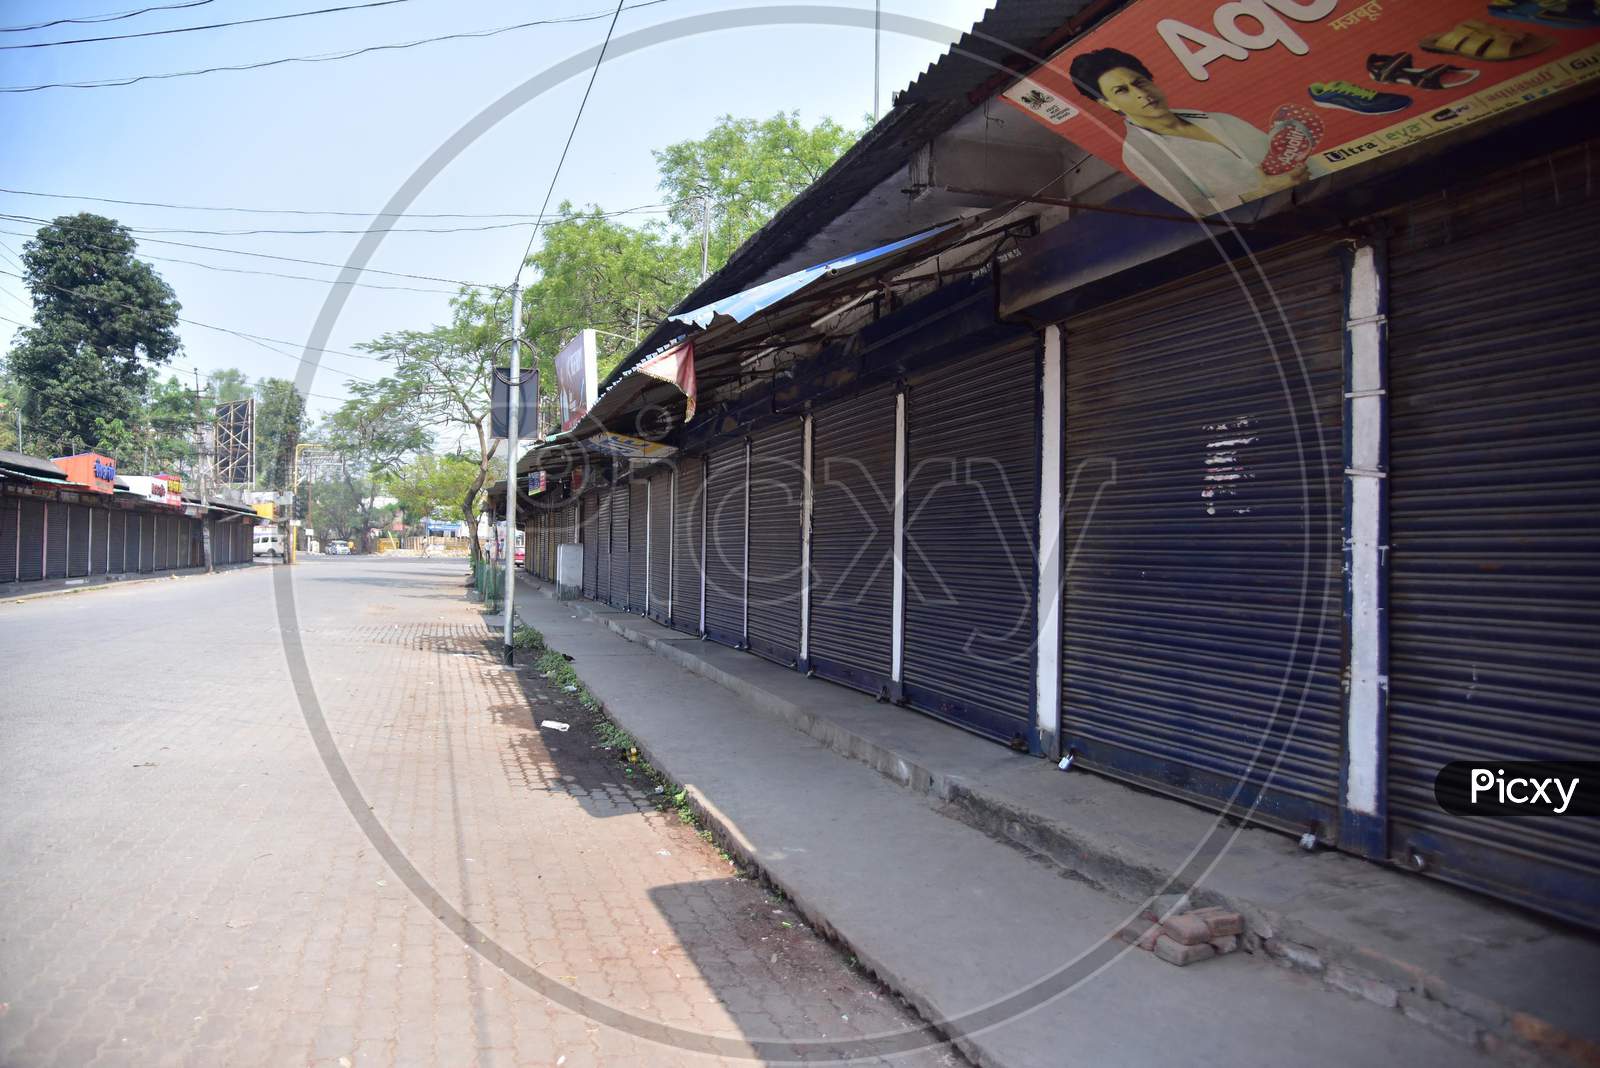 Shops Are Seen Closed  During A Nationwide Lockdown In The Wake Of Coronavirus Pandemic, In Nagaon District Of Assam,India